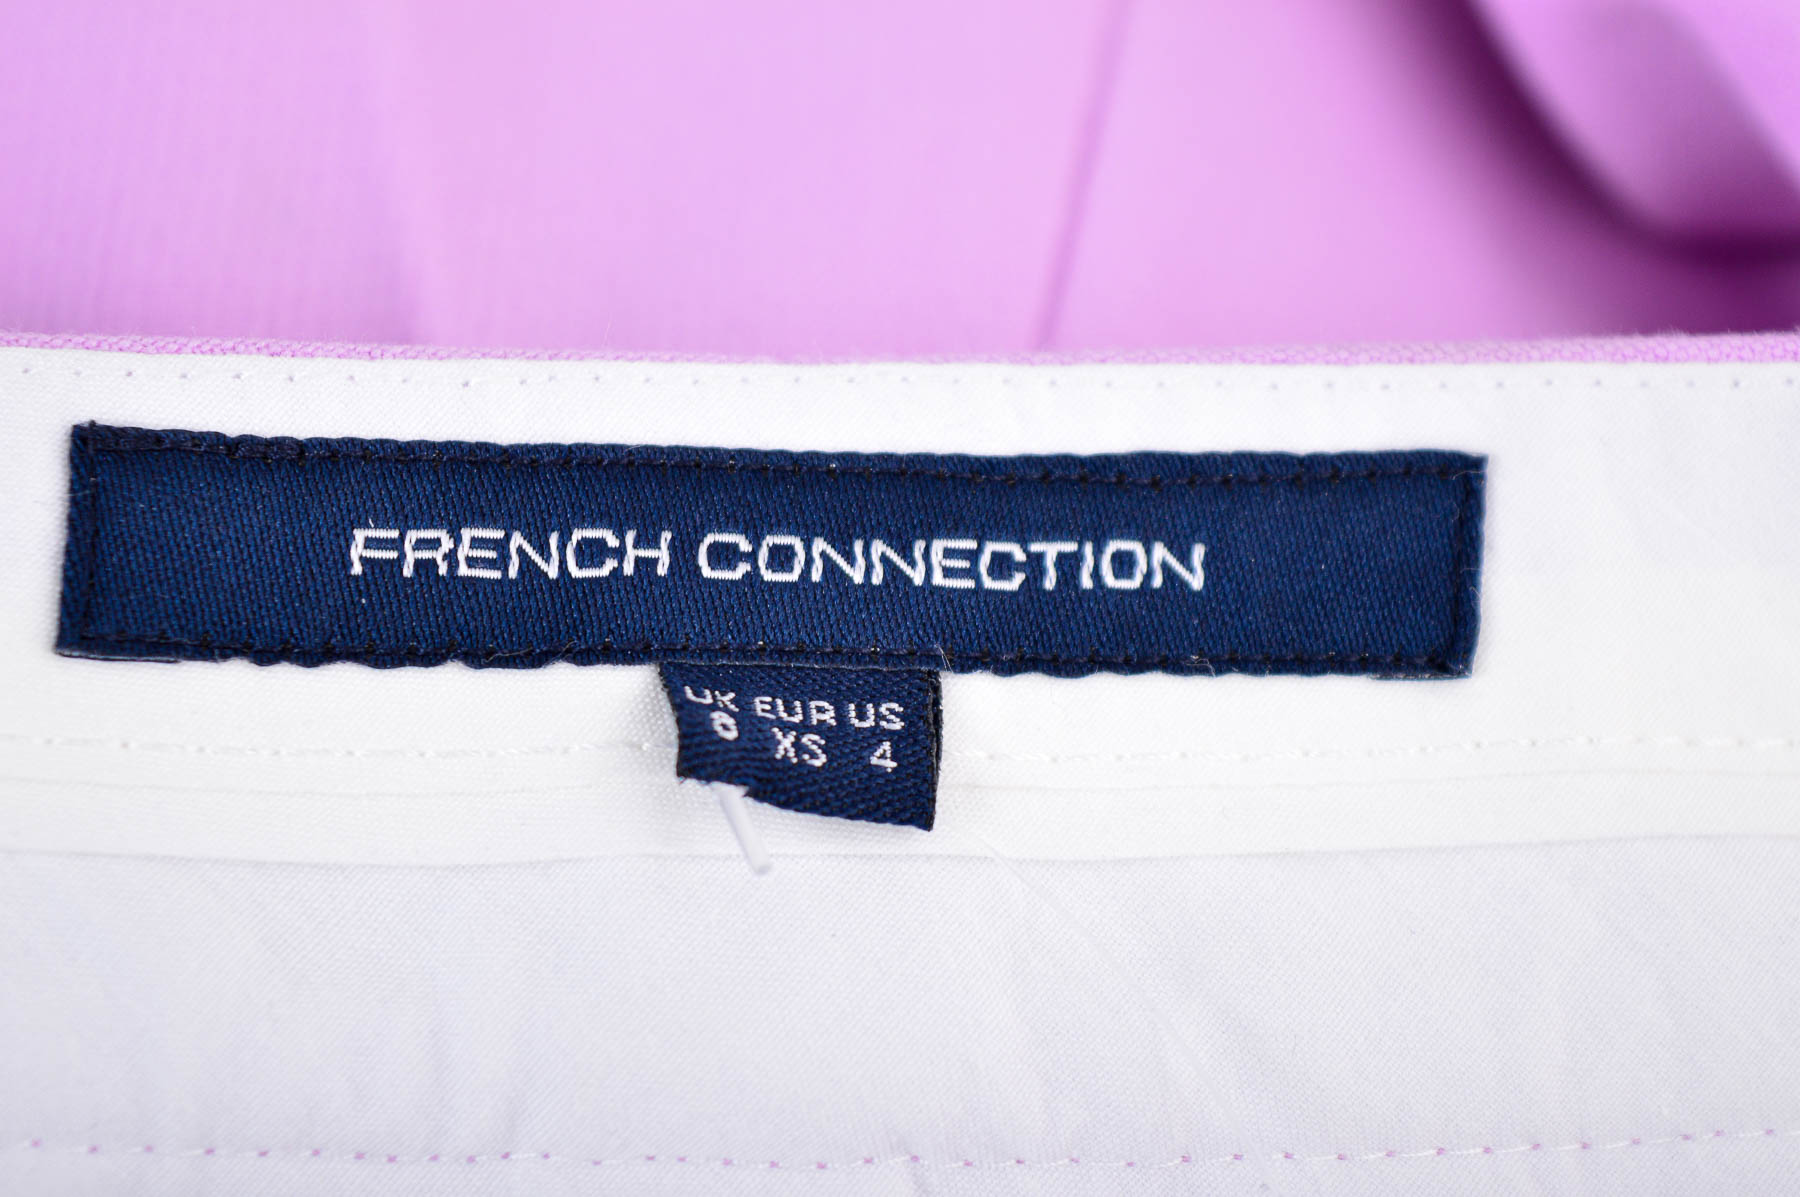 Women's trousers - French Connection - 2